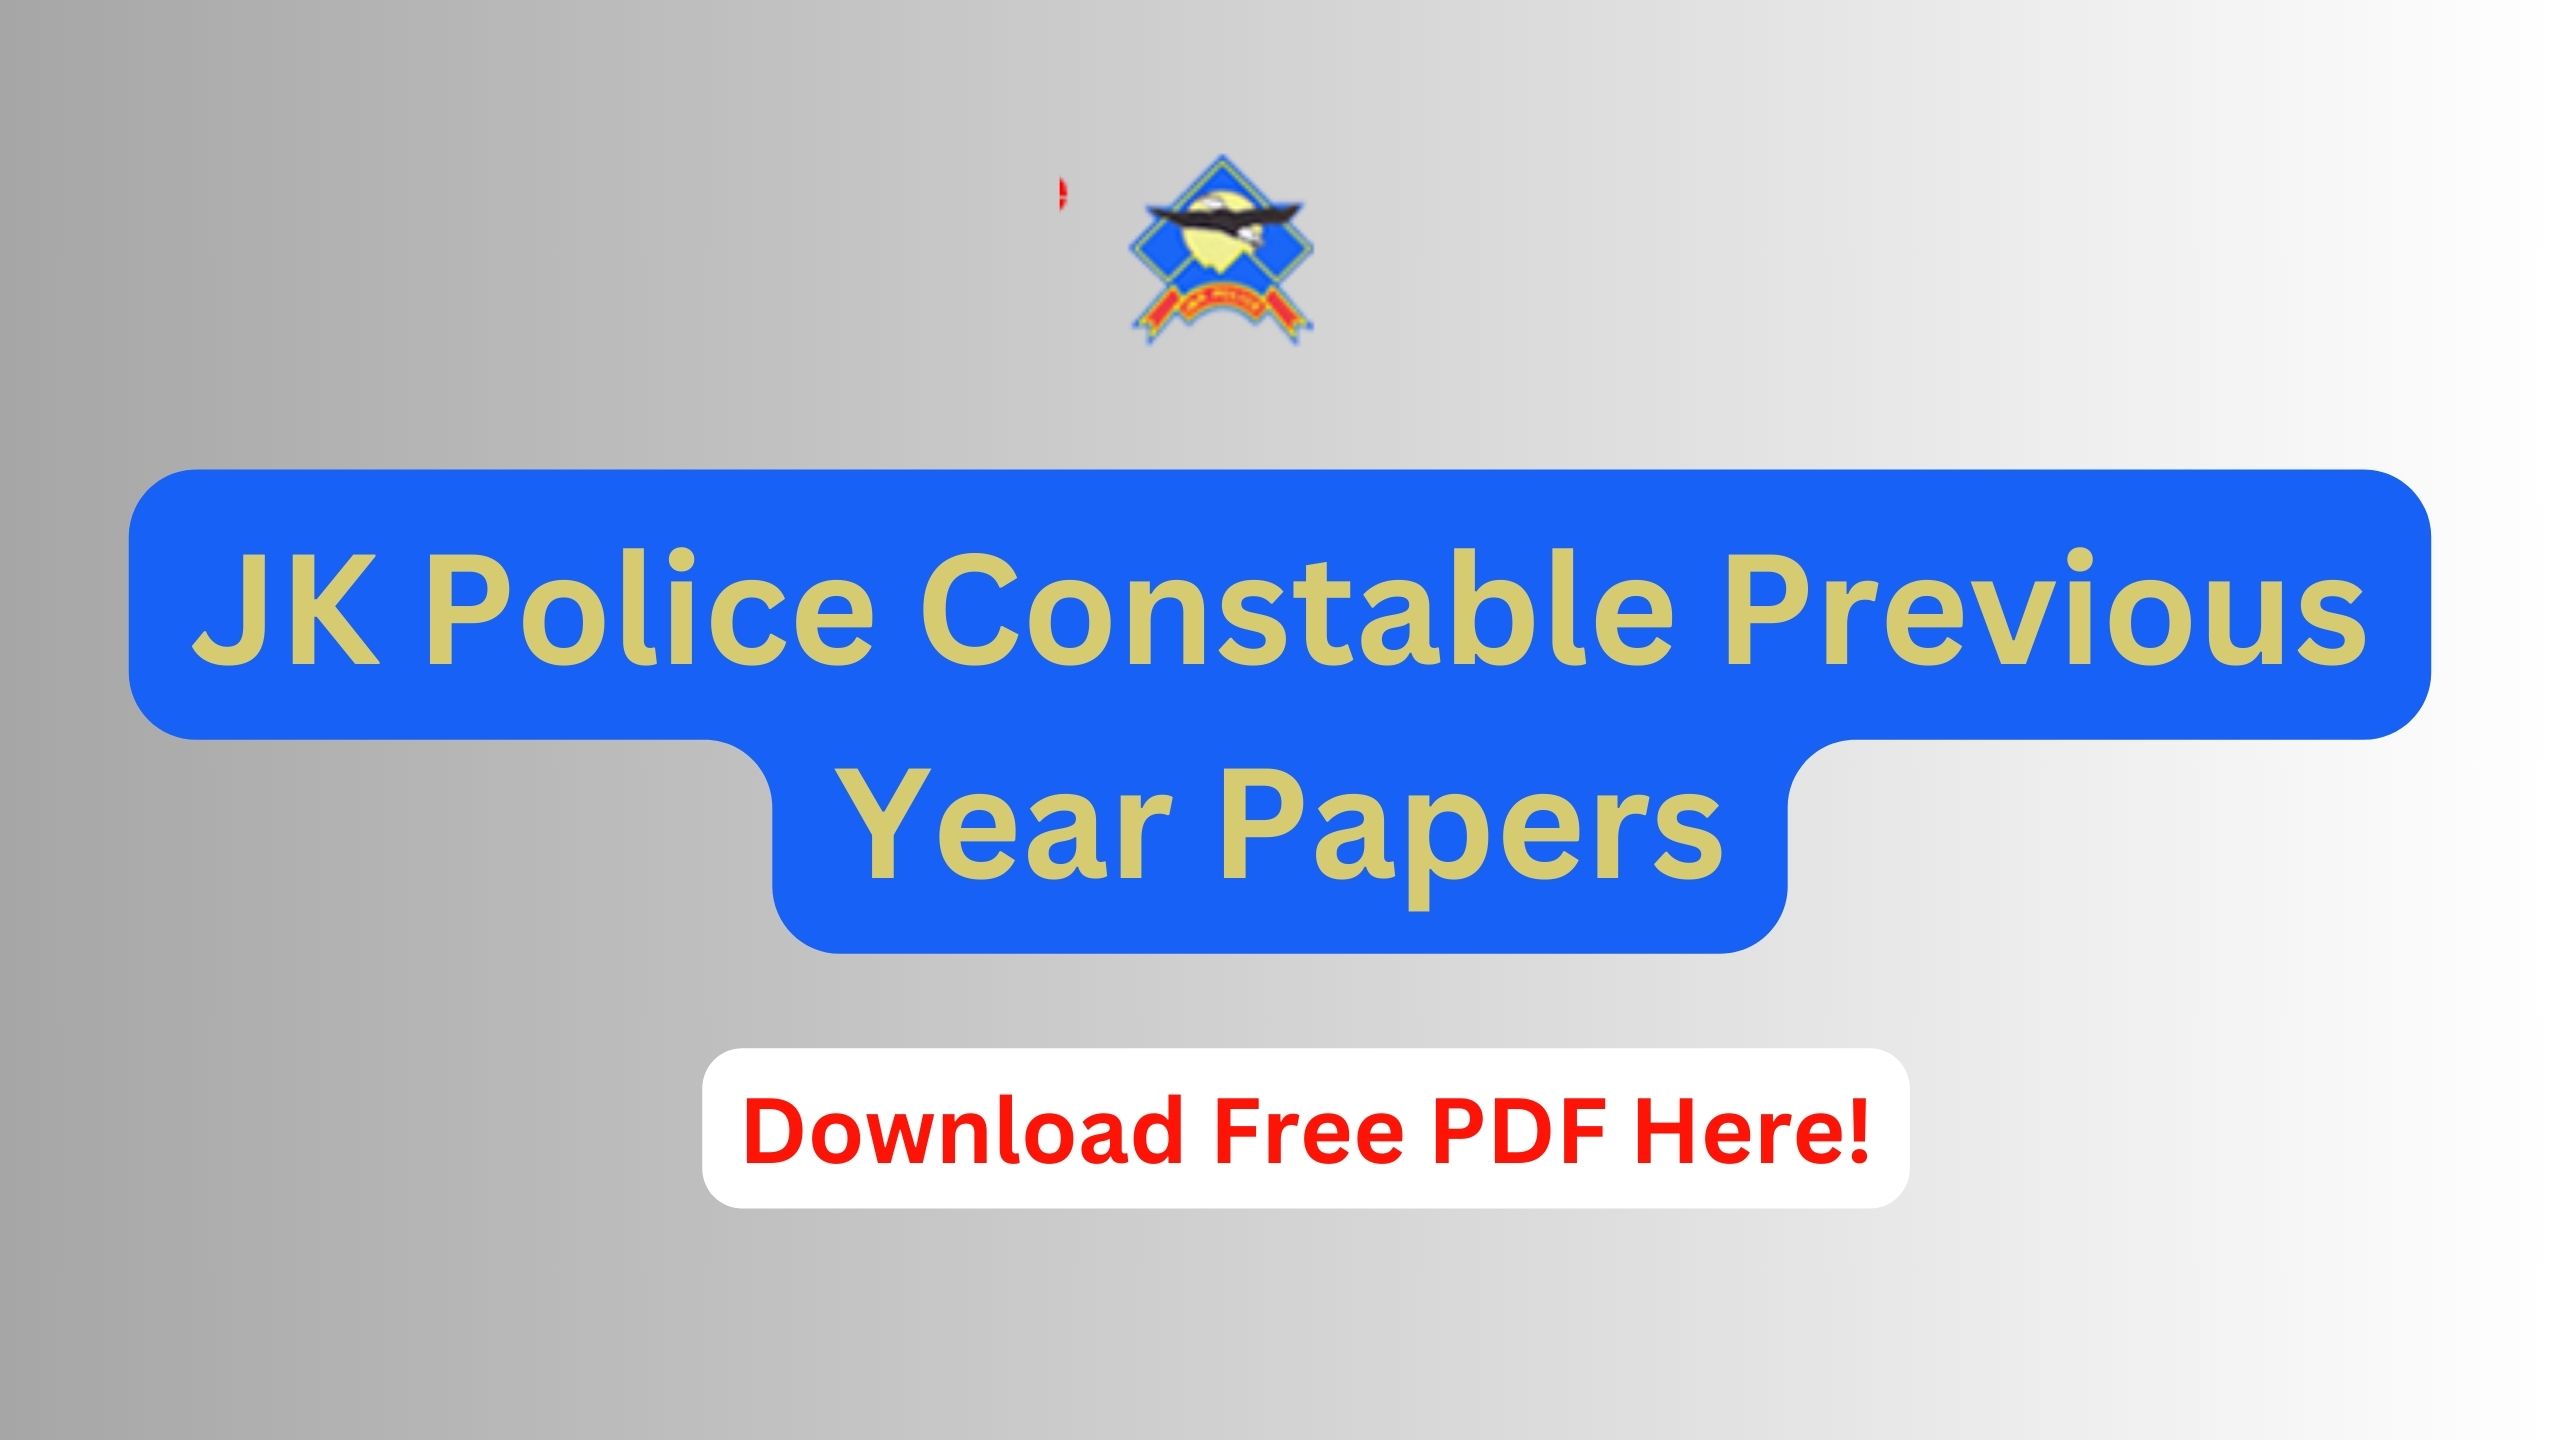 JK Police Constable Previous Year Papers